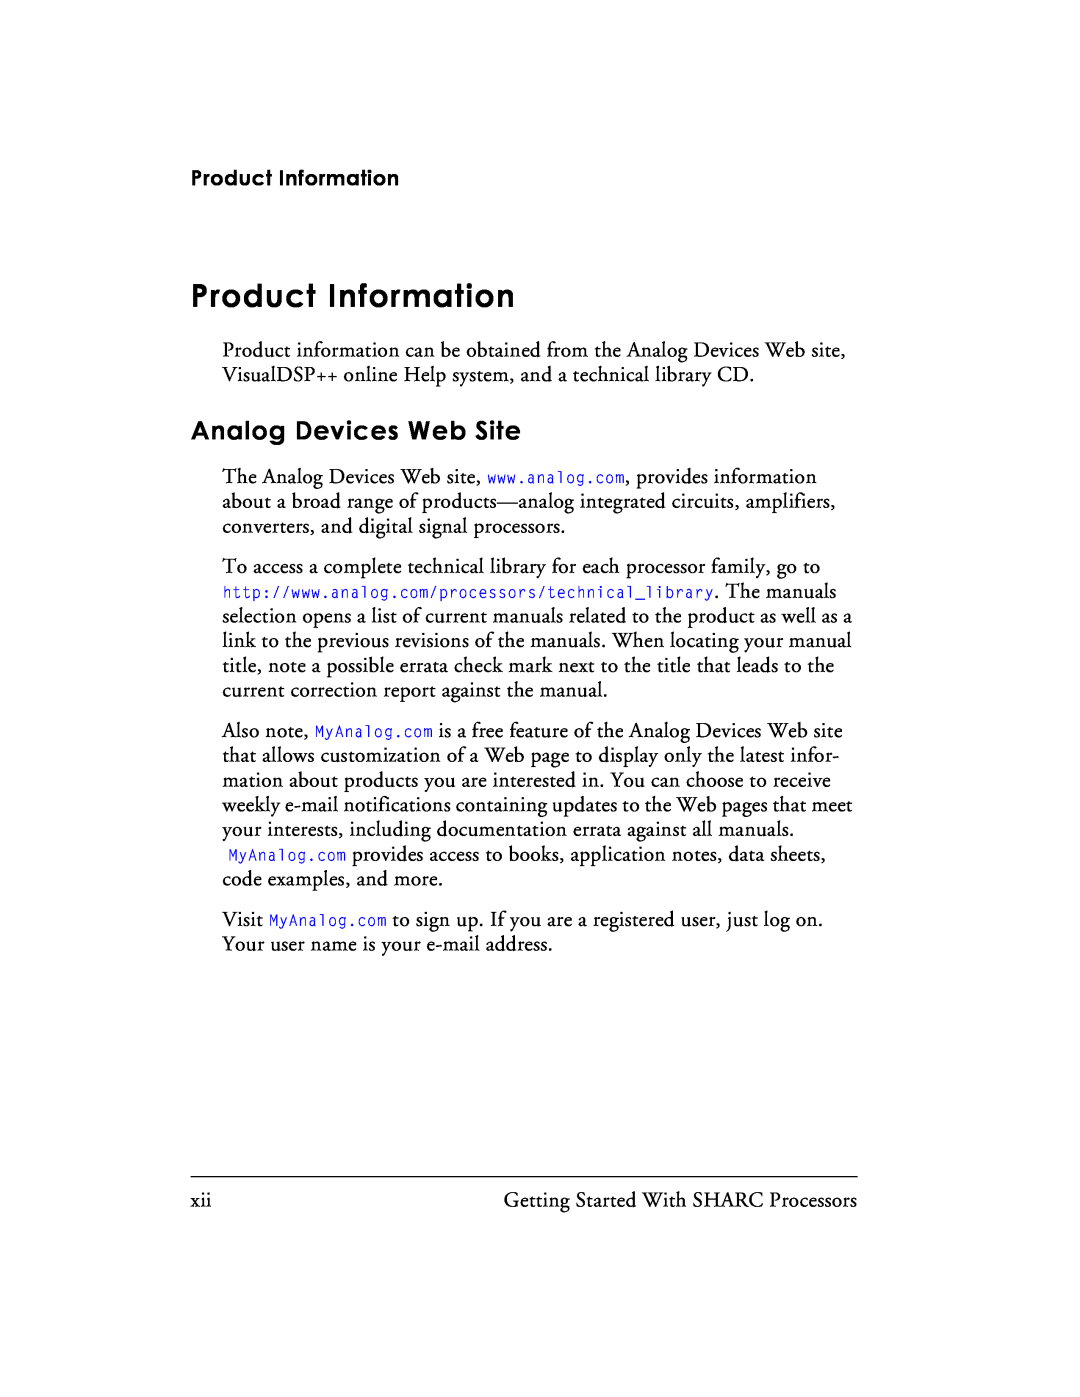 Analog Devices 82-003536-01 manual Product Information, Analog Devices Web Site 